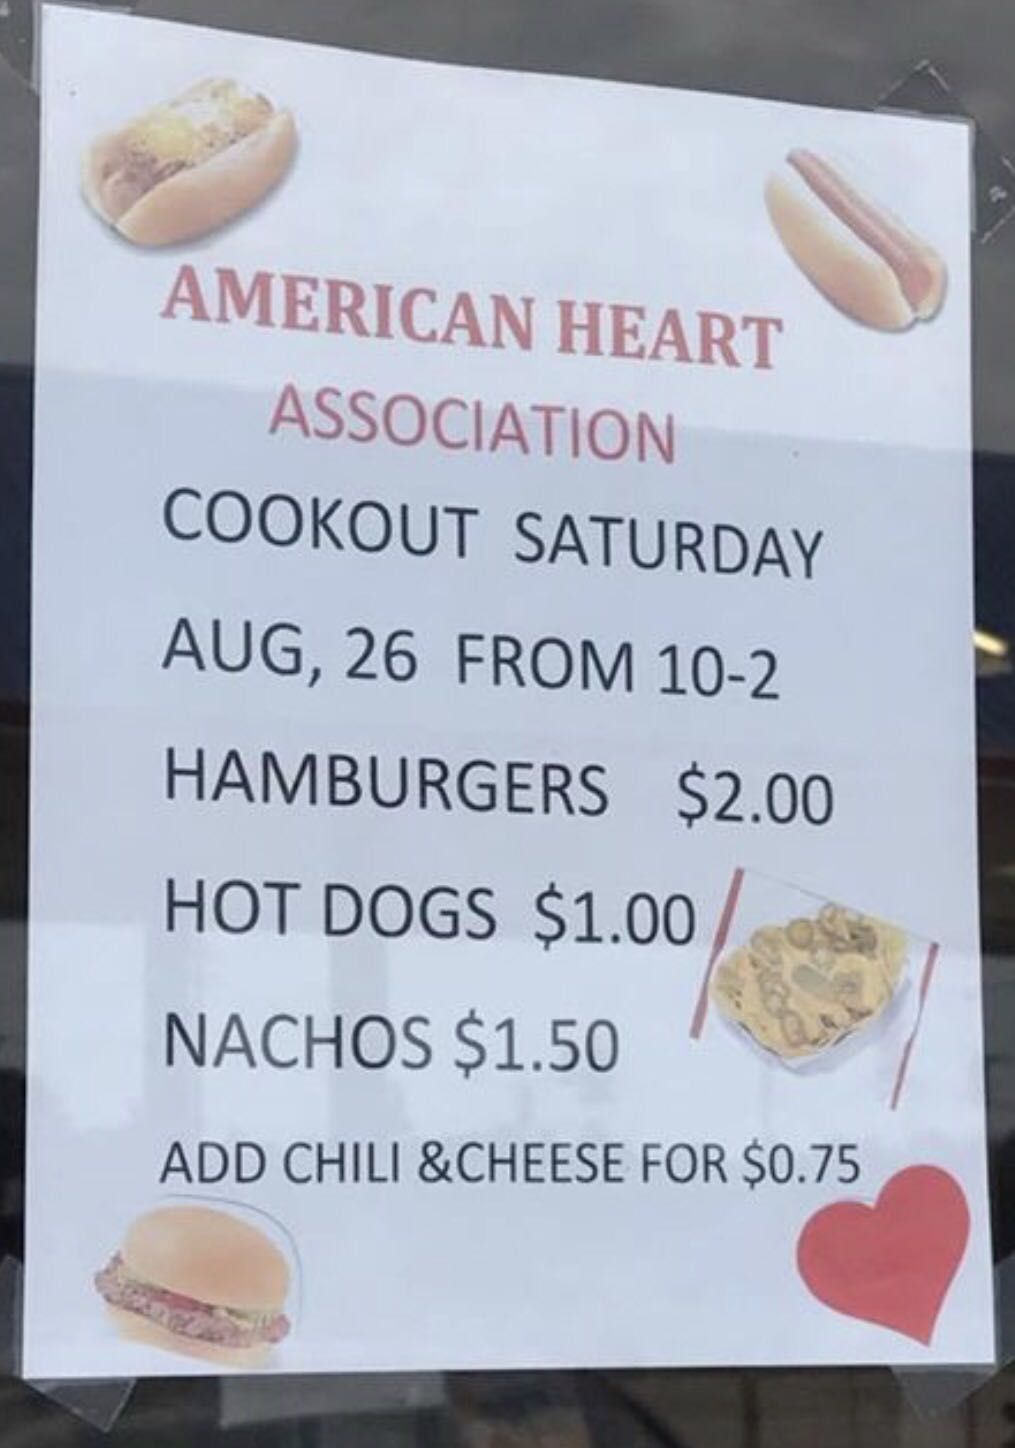 This is how we in Mississippi fight heart disease